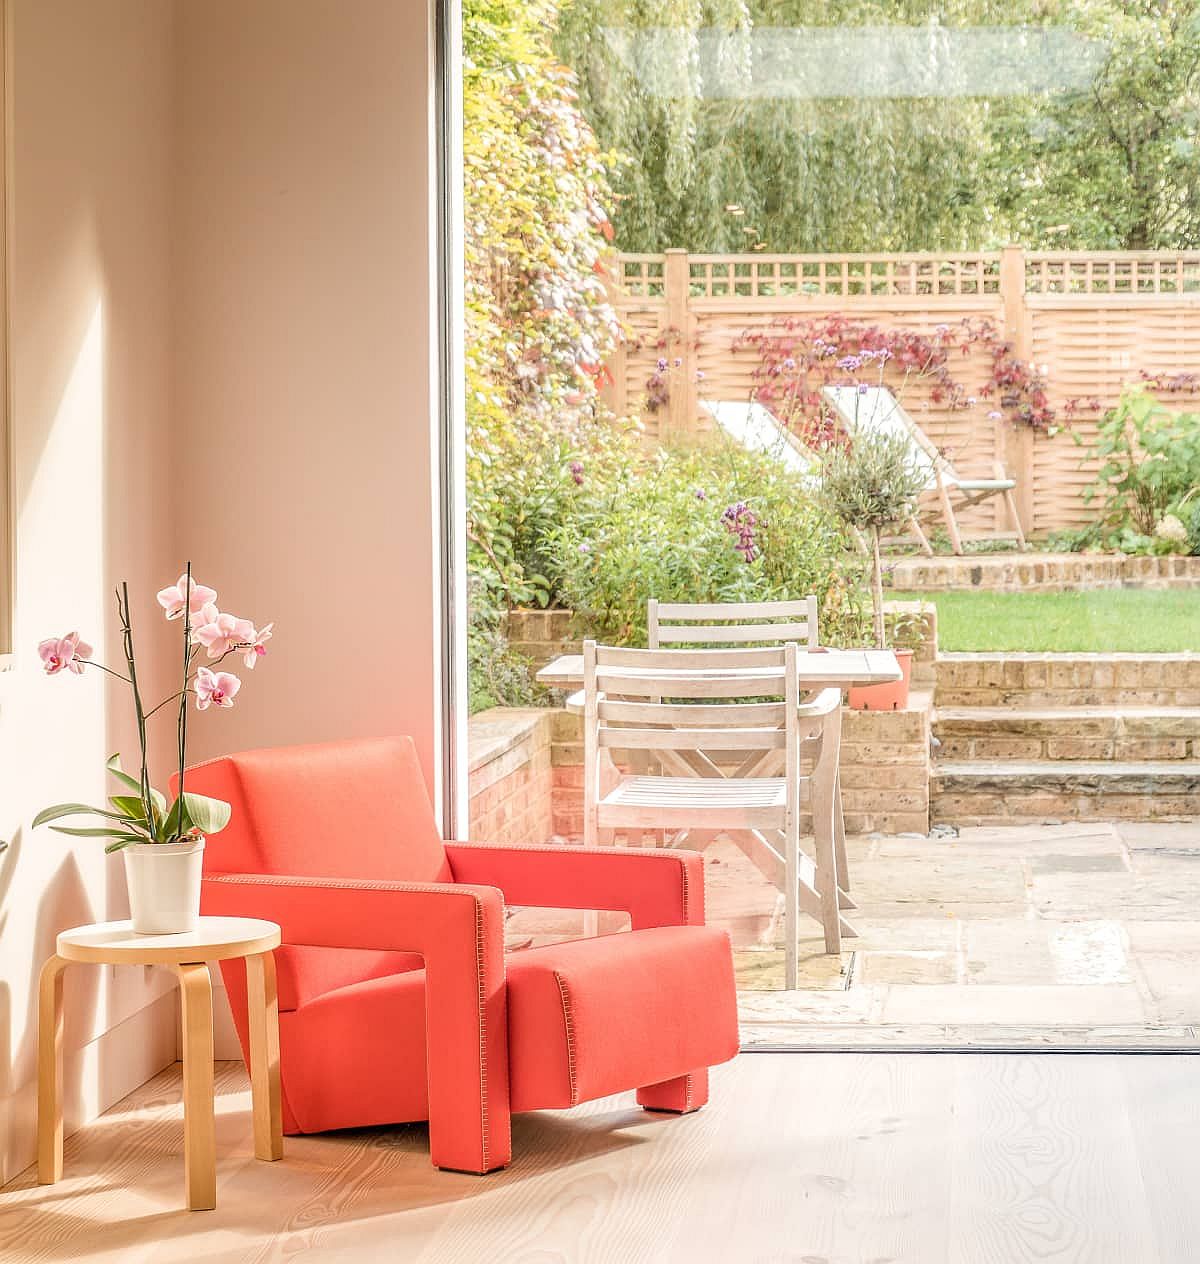 Pop of pink brought into the living space using the comfy armchair